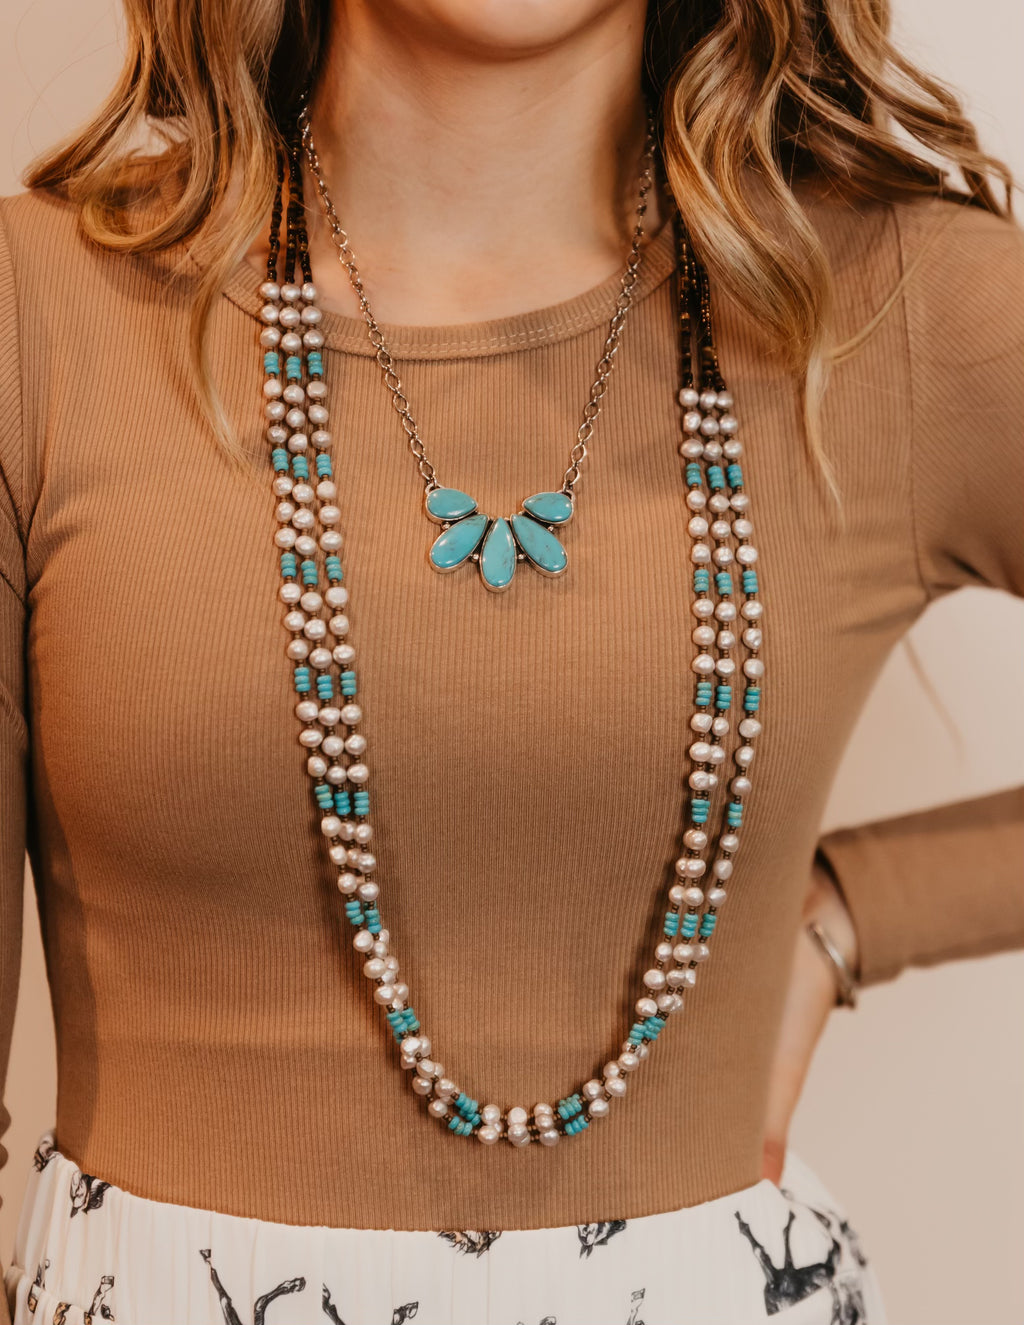 The Tullo Turquoise Ribbon Necklace, 4